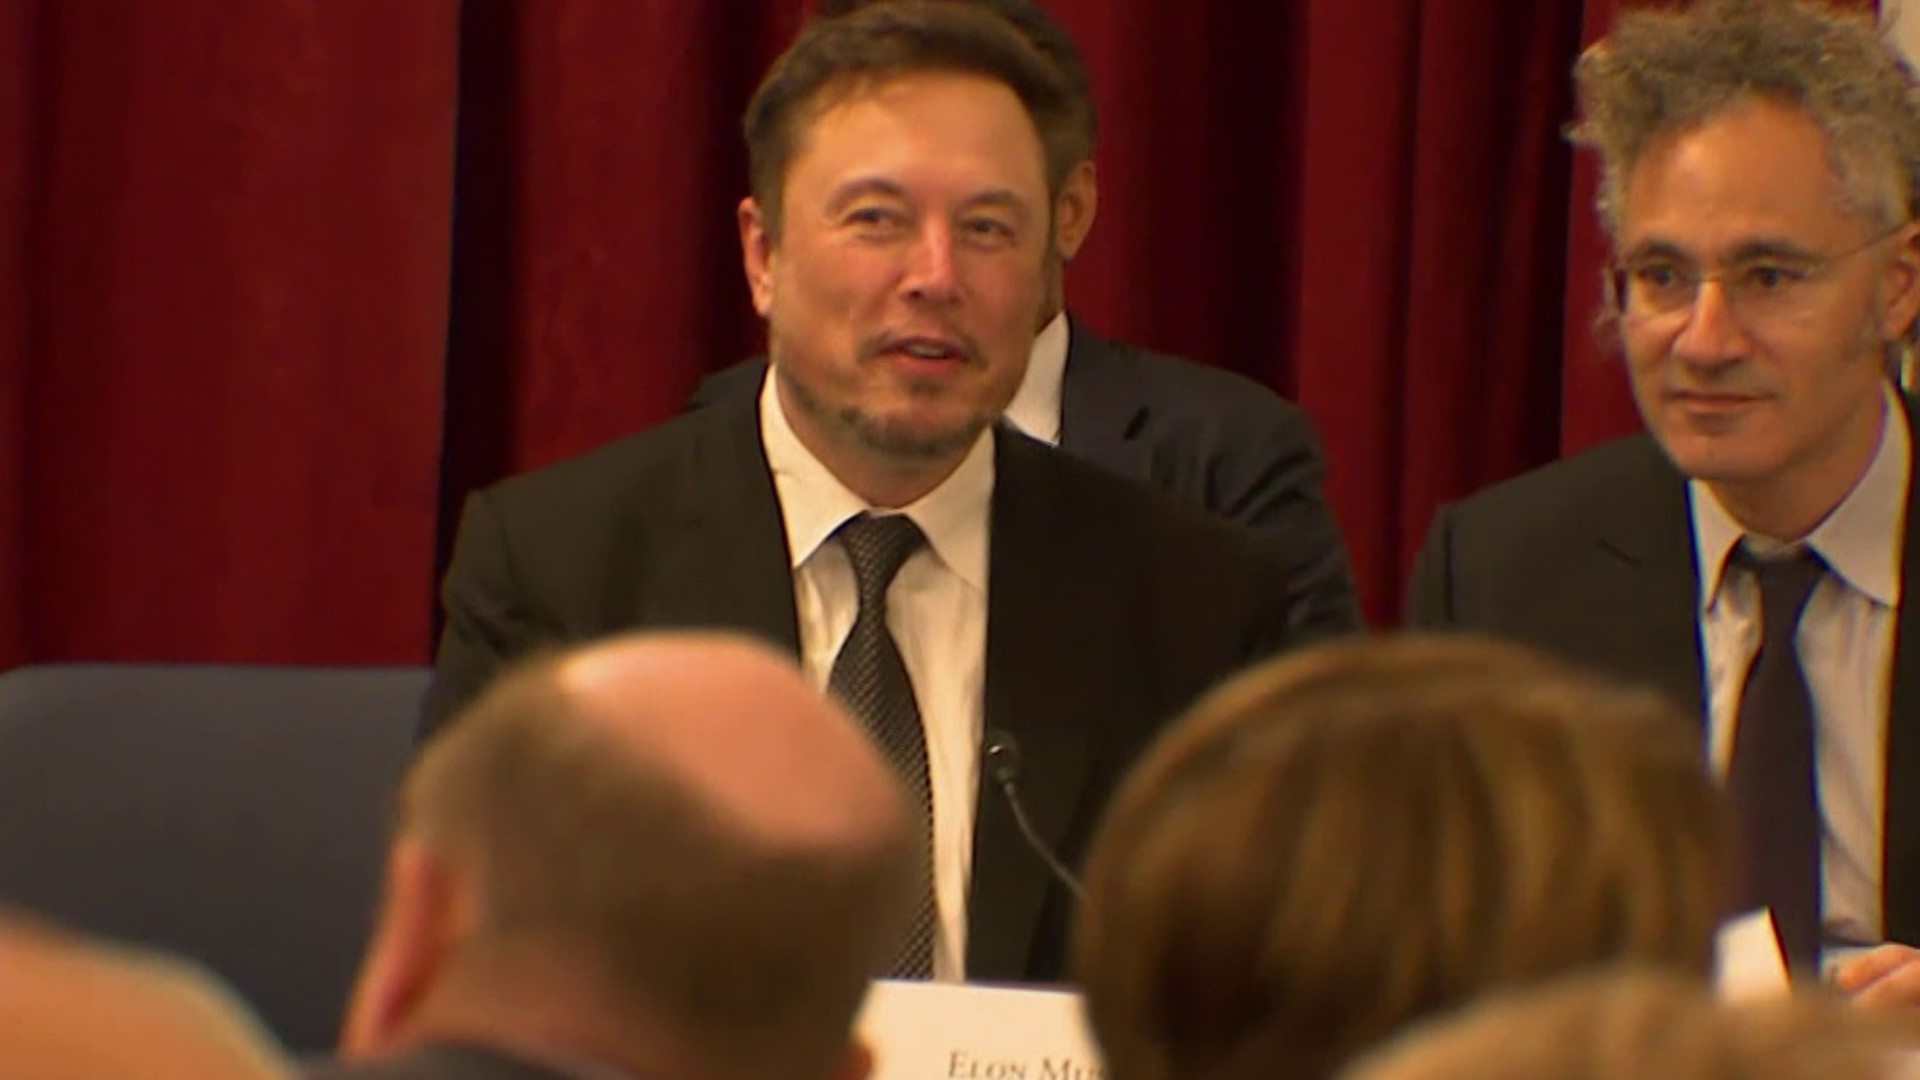 Leaders of tech companies like Tesla, Google, Meta, OpenAI and more met in Capitol Hill for what Elon Musk called a “historic” meeting.